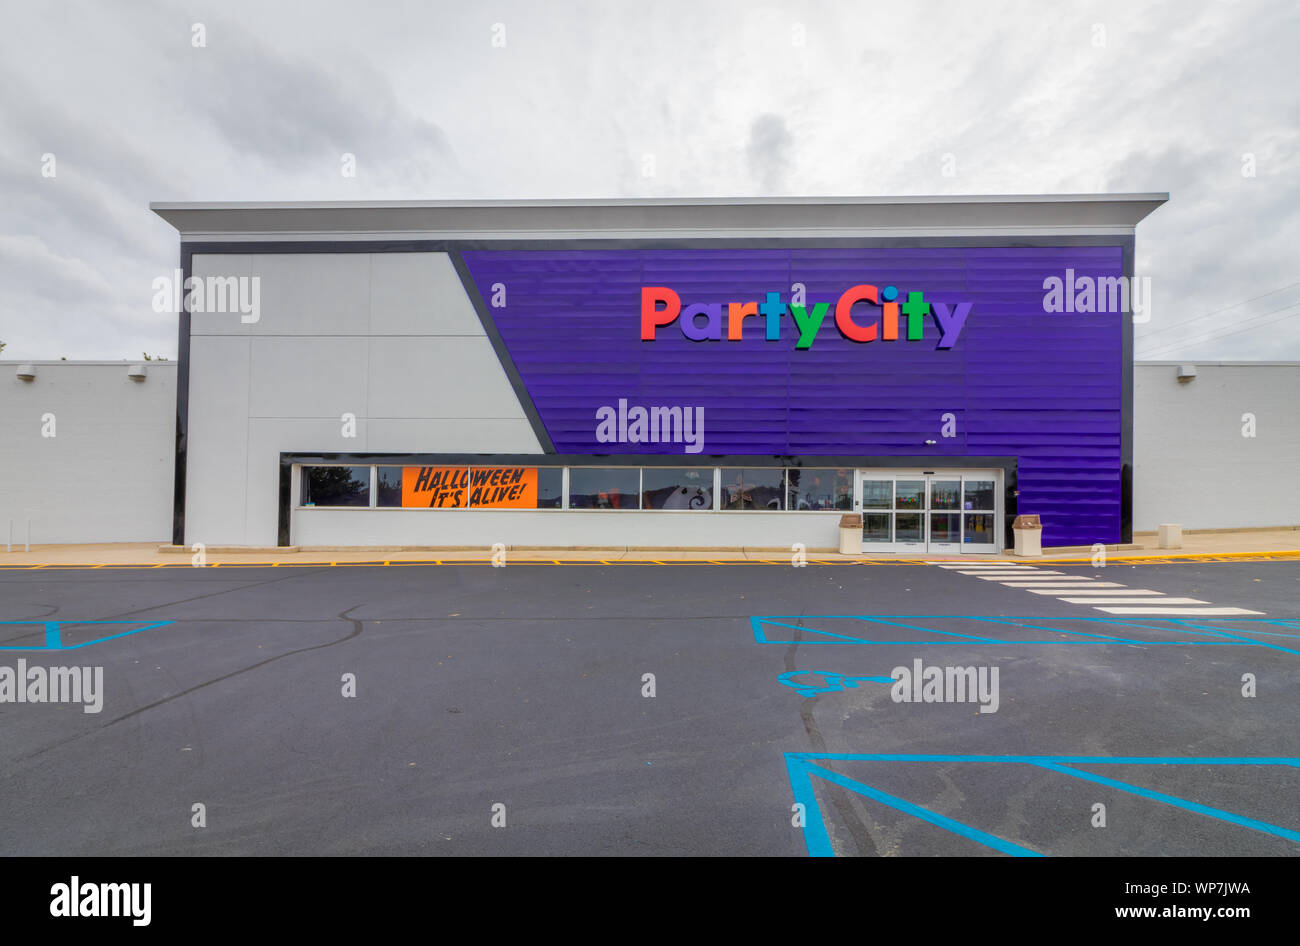 Rockaway, NJ / USA - September 6, 2019: Party City Retail Store in new purple concept design soon to debut Grand Opening Stock Photo - Alamy